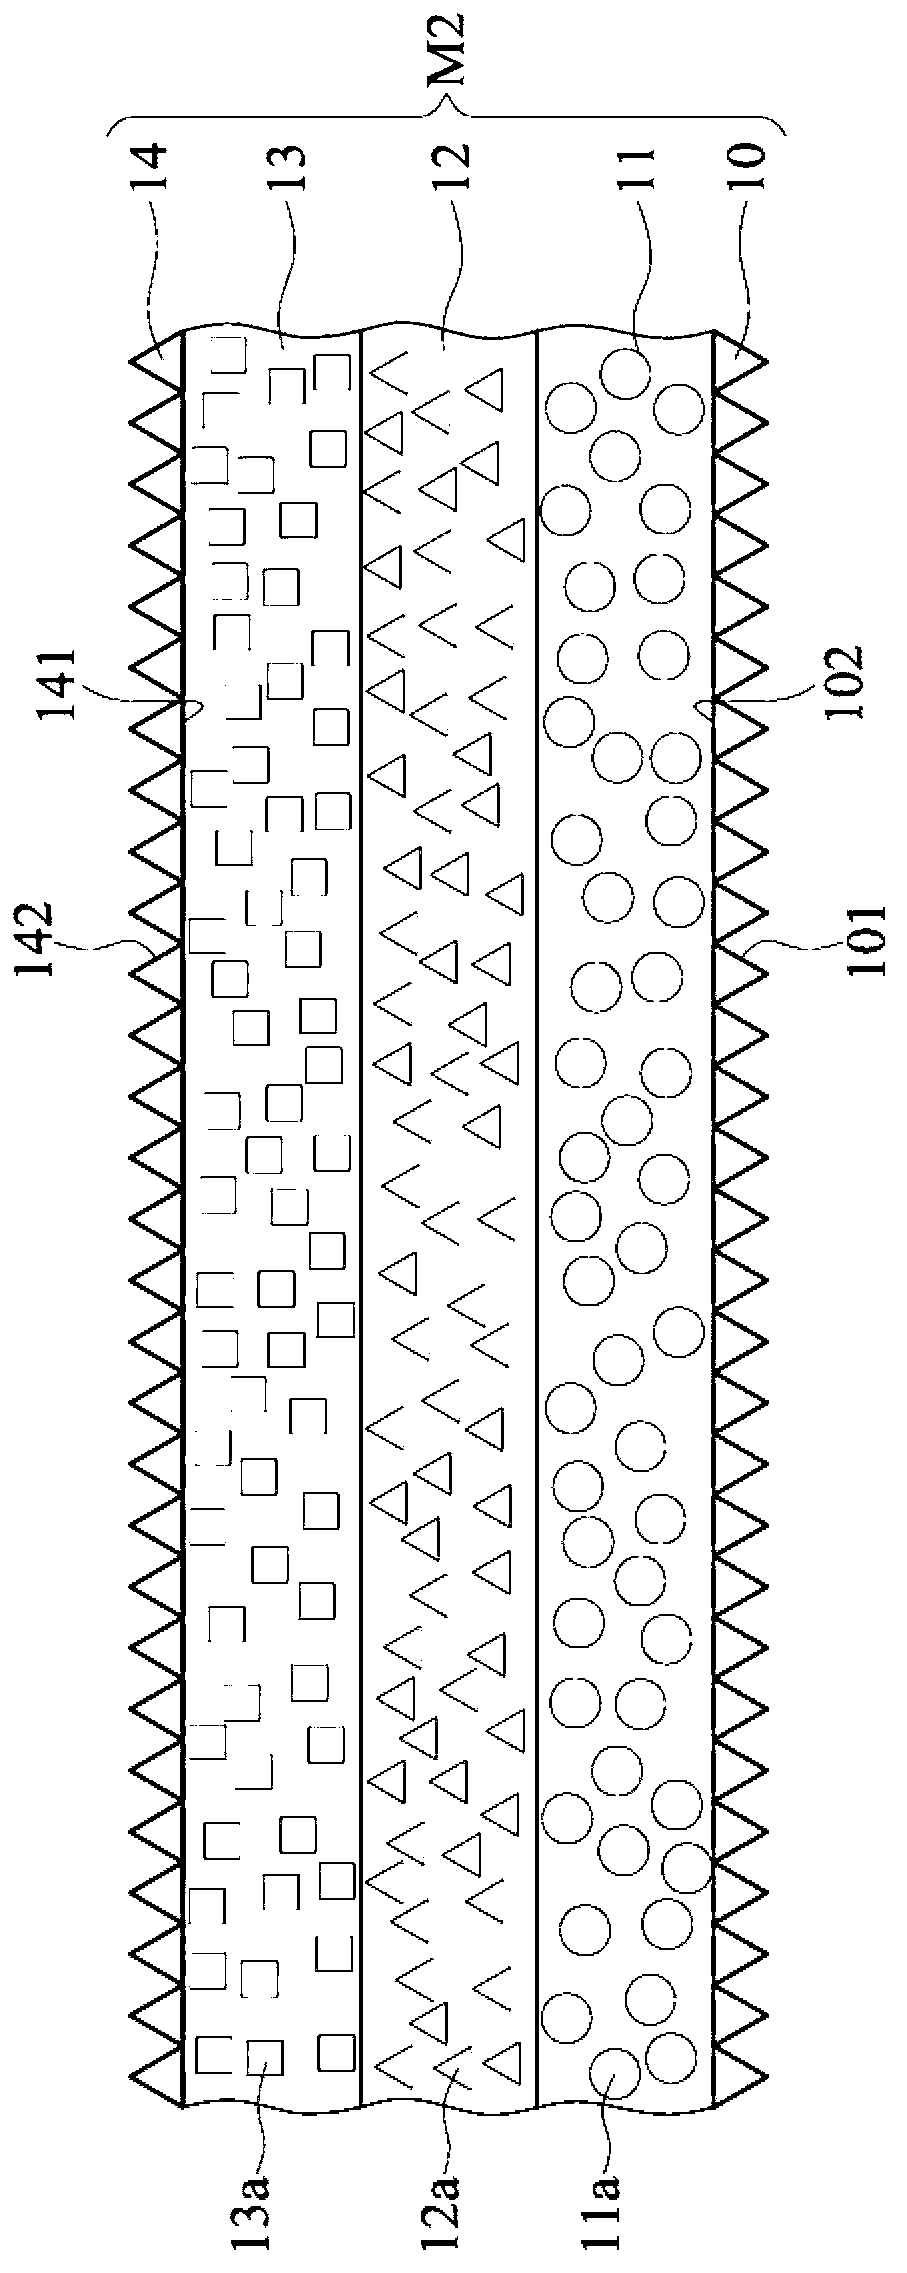 Optical converting structure and led packing structure employing the optical converting structure